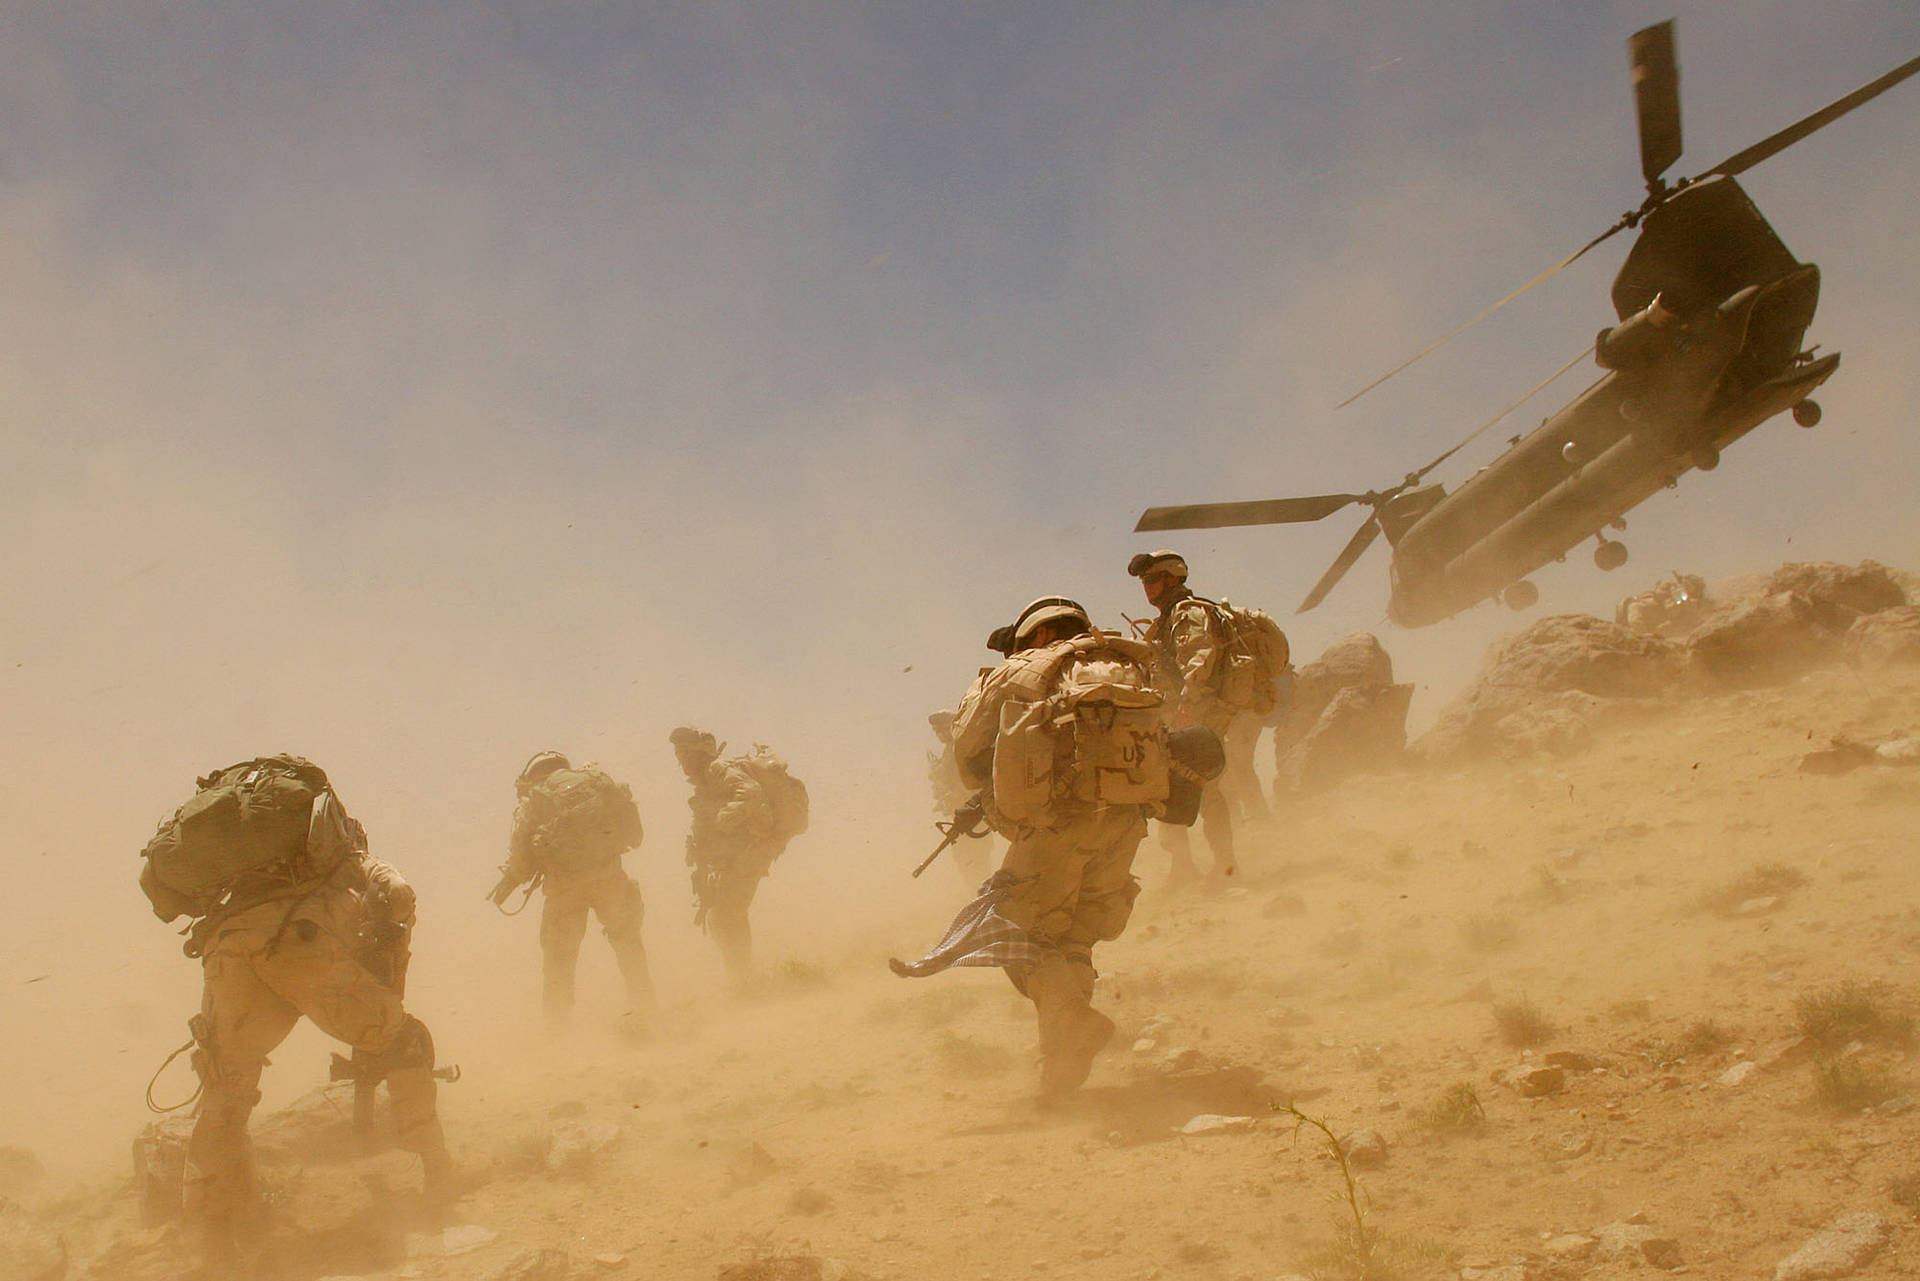 Caption: Afghanistan Military Forces in a Desert Storm Wallpaper